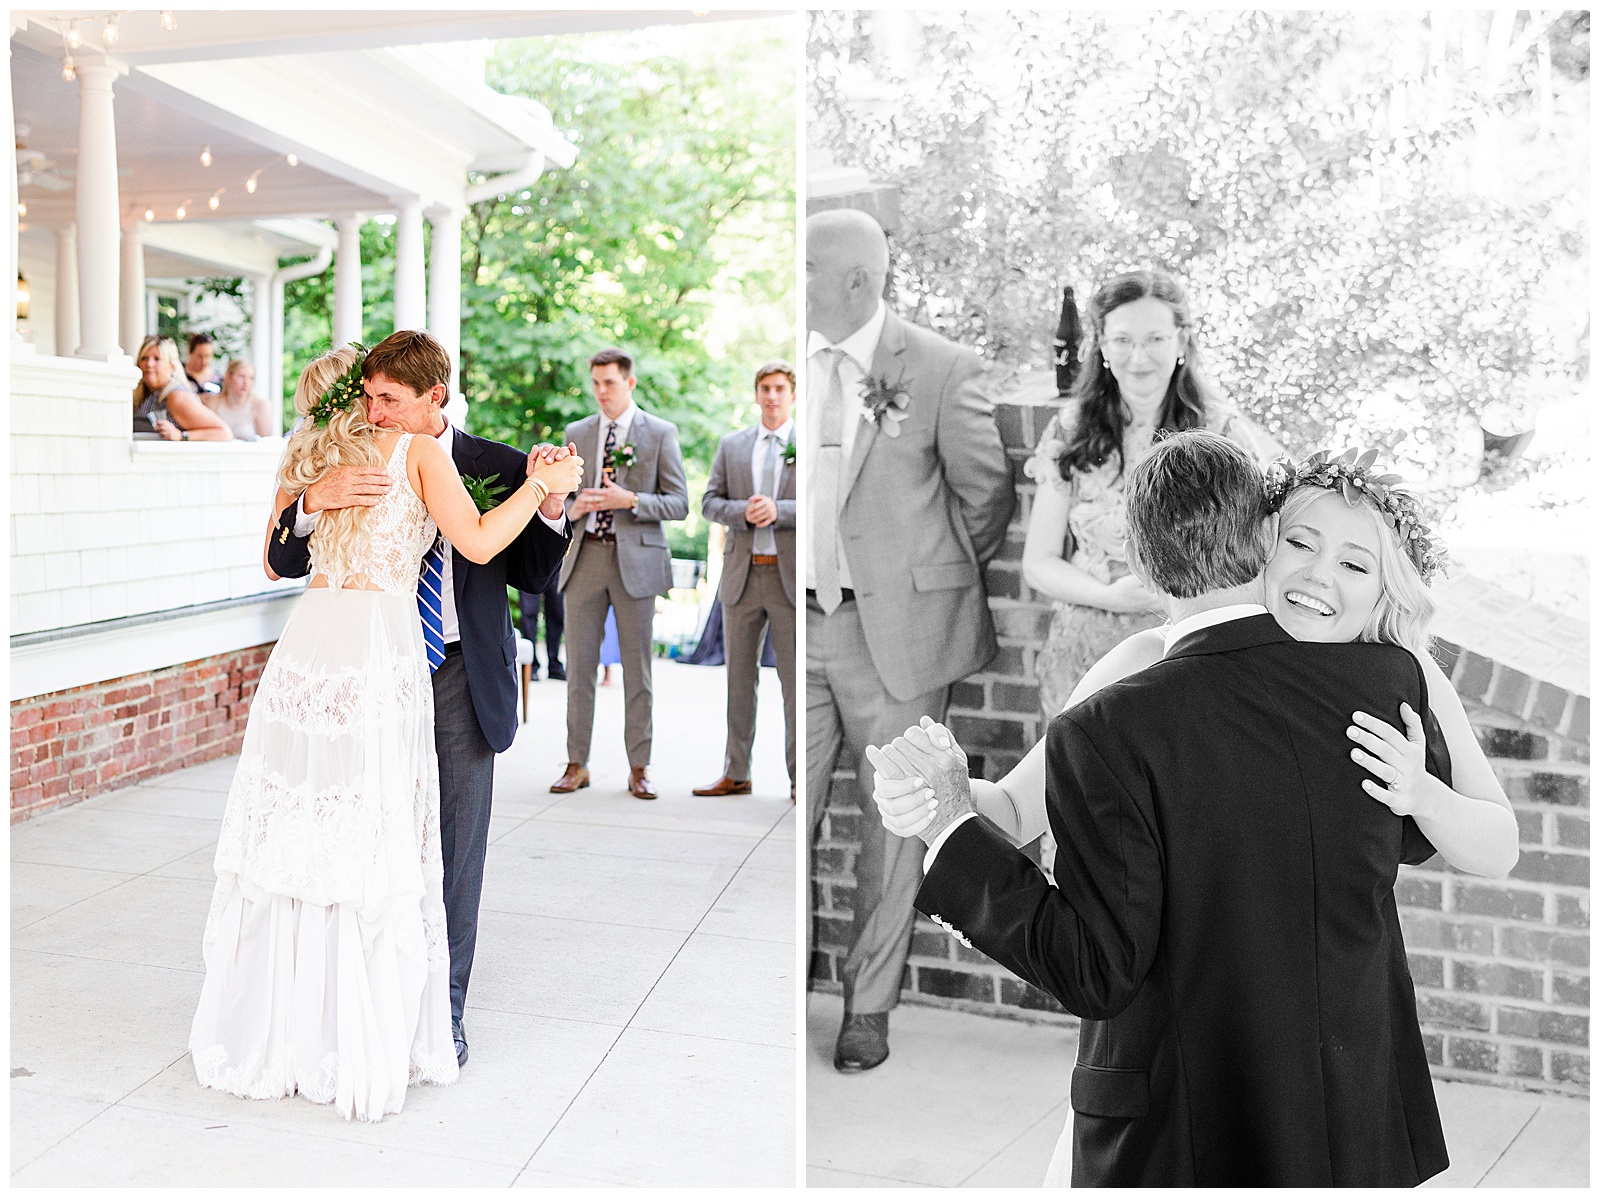 Emotional Bohemian Bride and Dad Father-Daughter dance from Boho Chic Summer Wedding in Charlotte, NC | check out the full wedding at KevynDixonPhoto.com